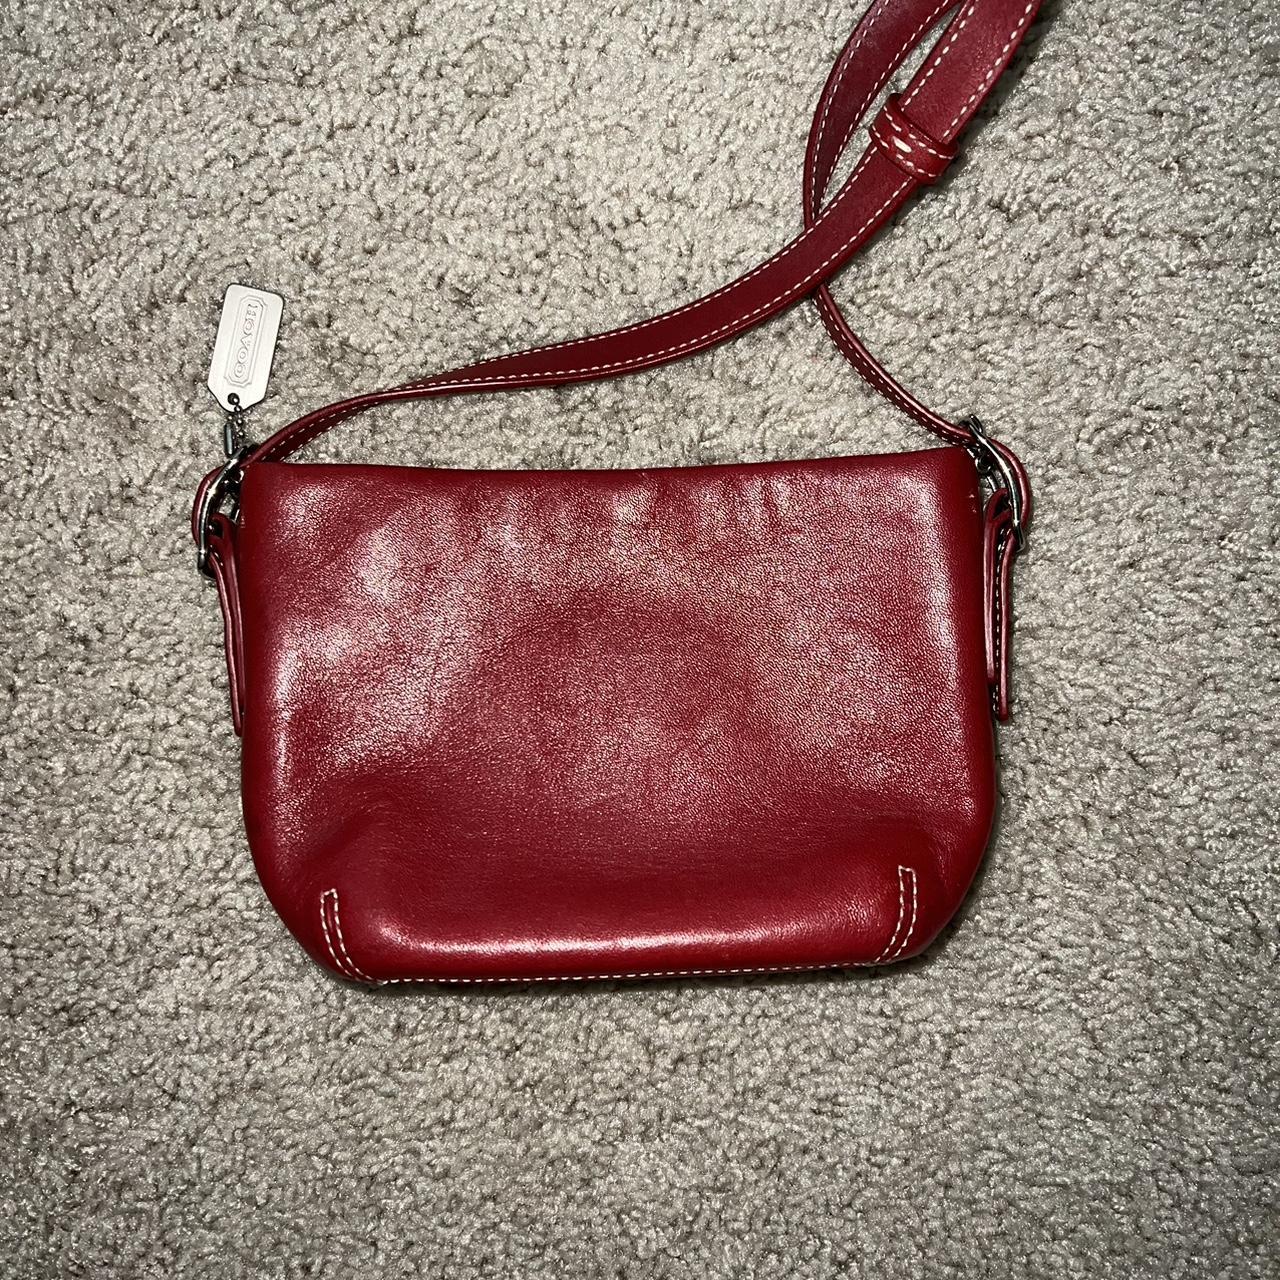 Coach Vintage Leather Bags And Purses